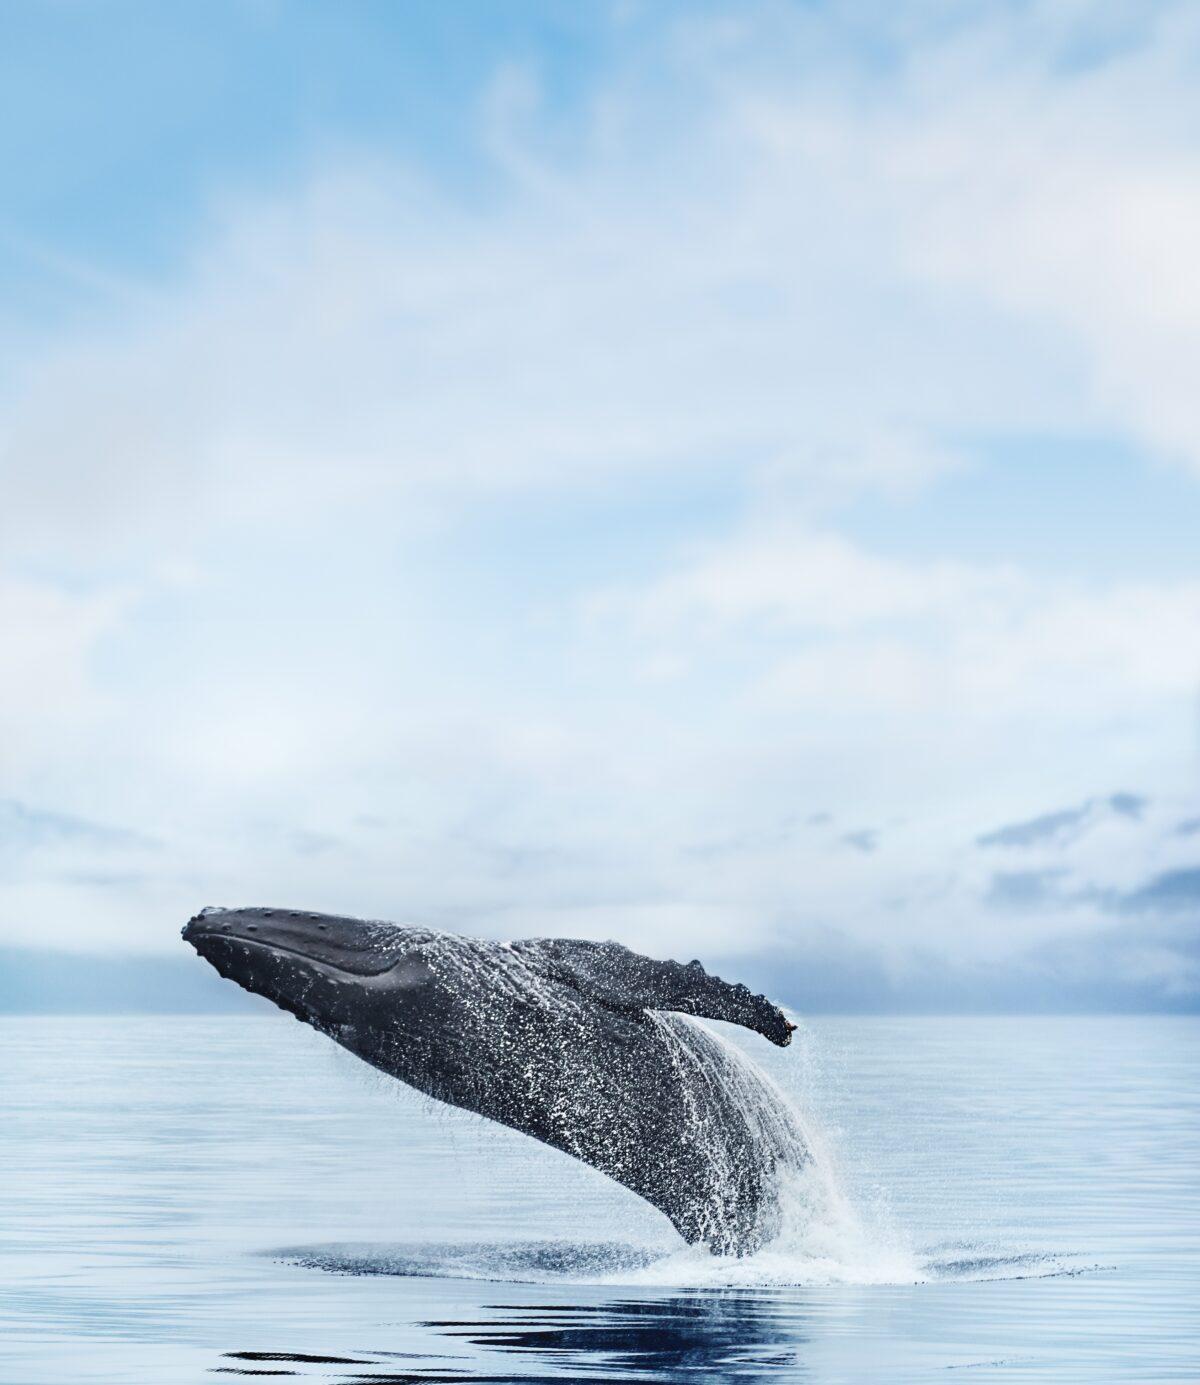  A breaching whale. (Courtesy of Princess)